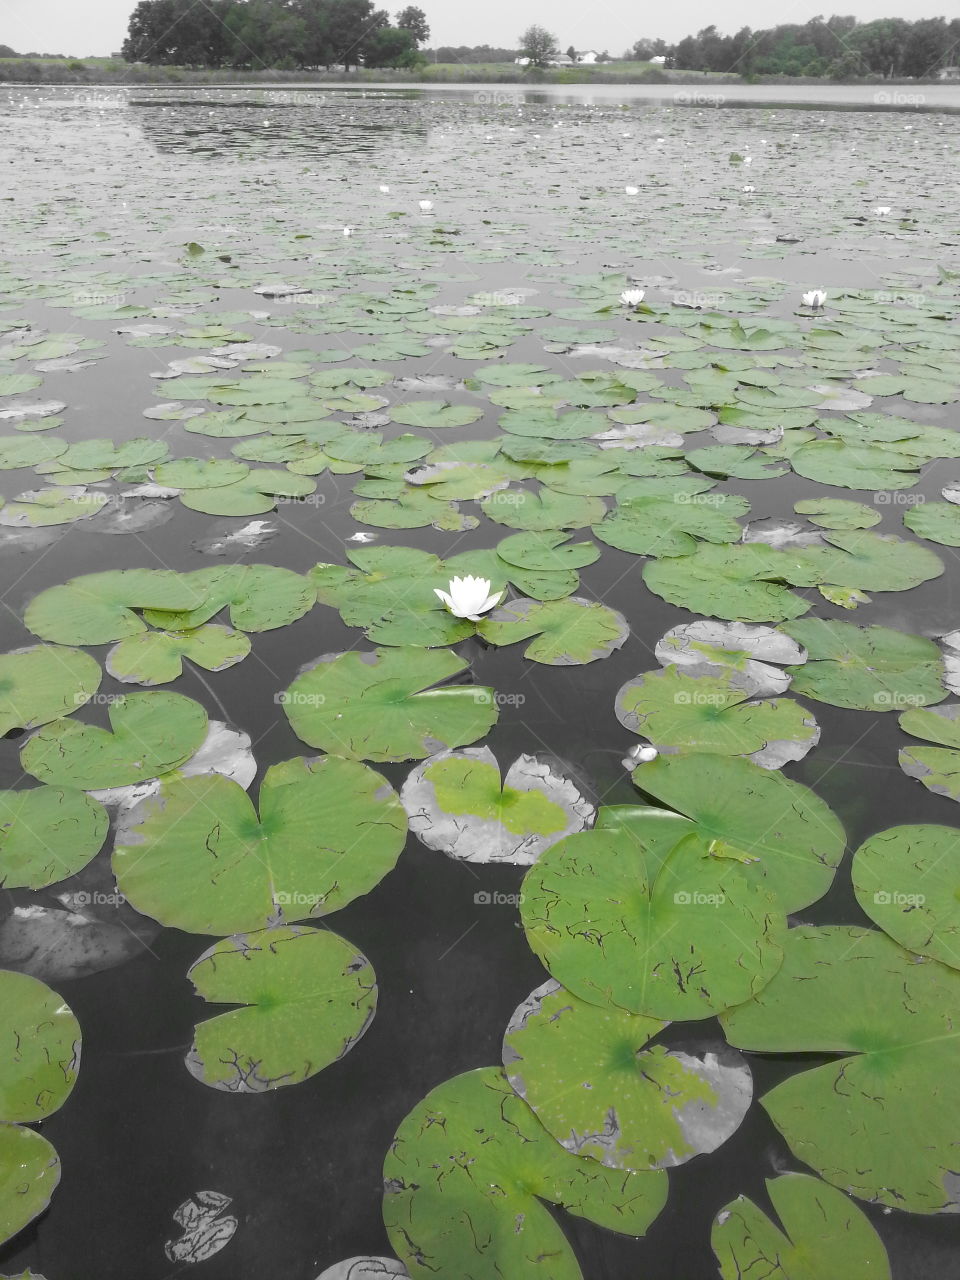 Lily pads. looking for some bass to catch.